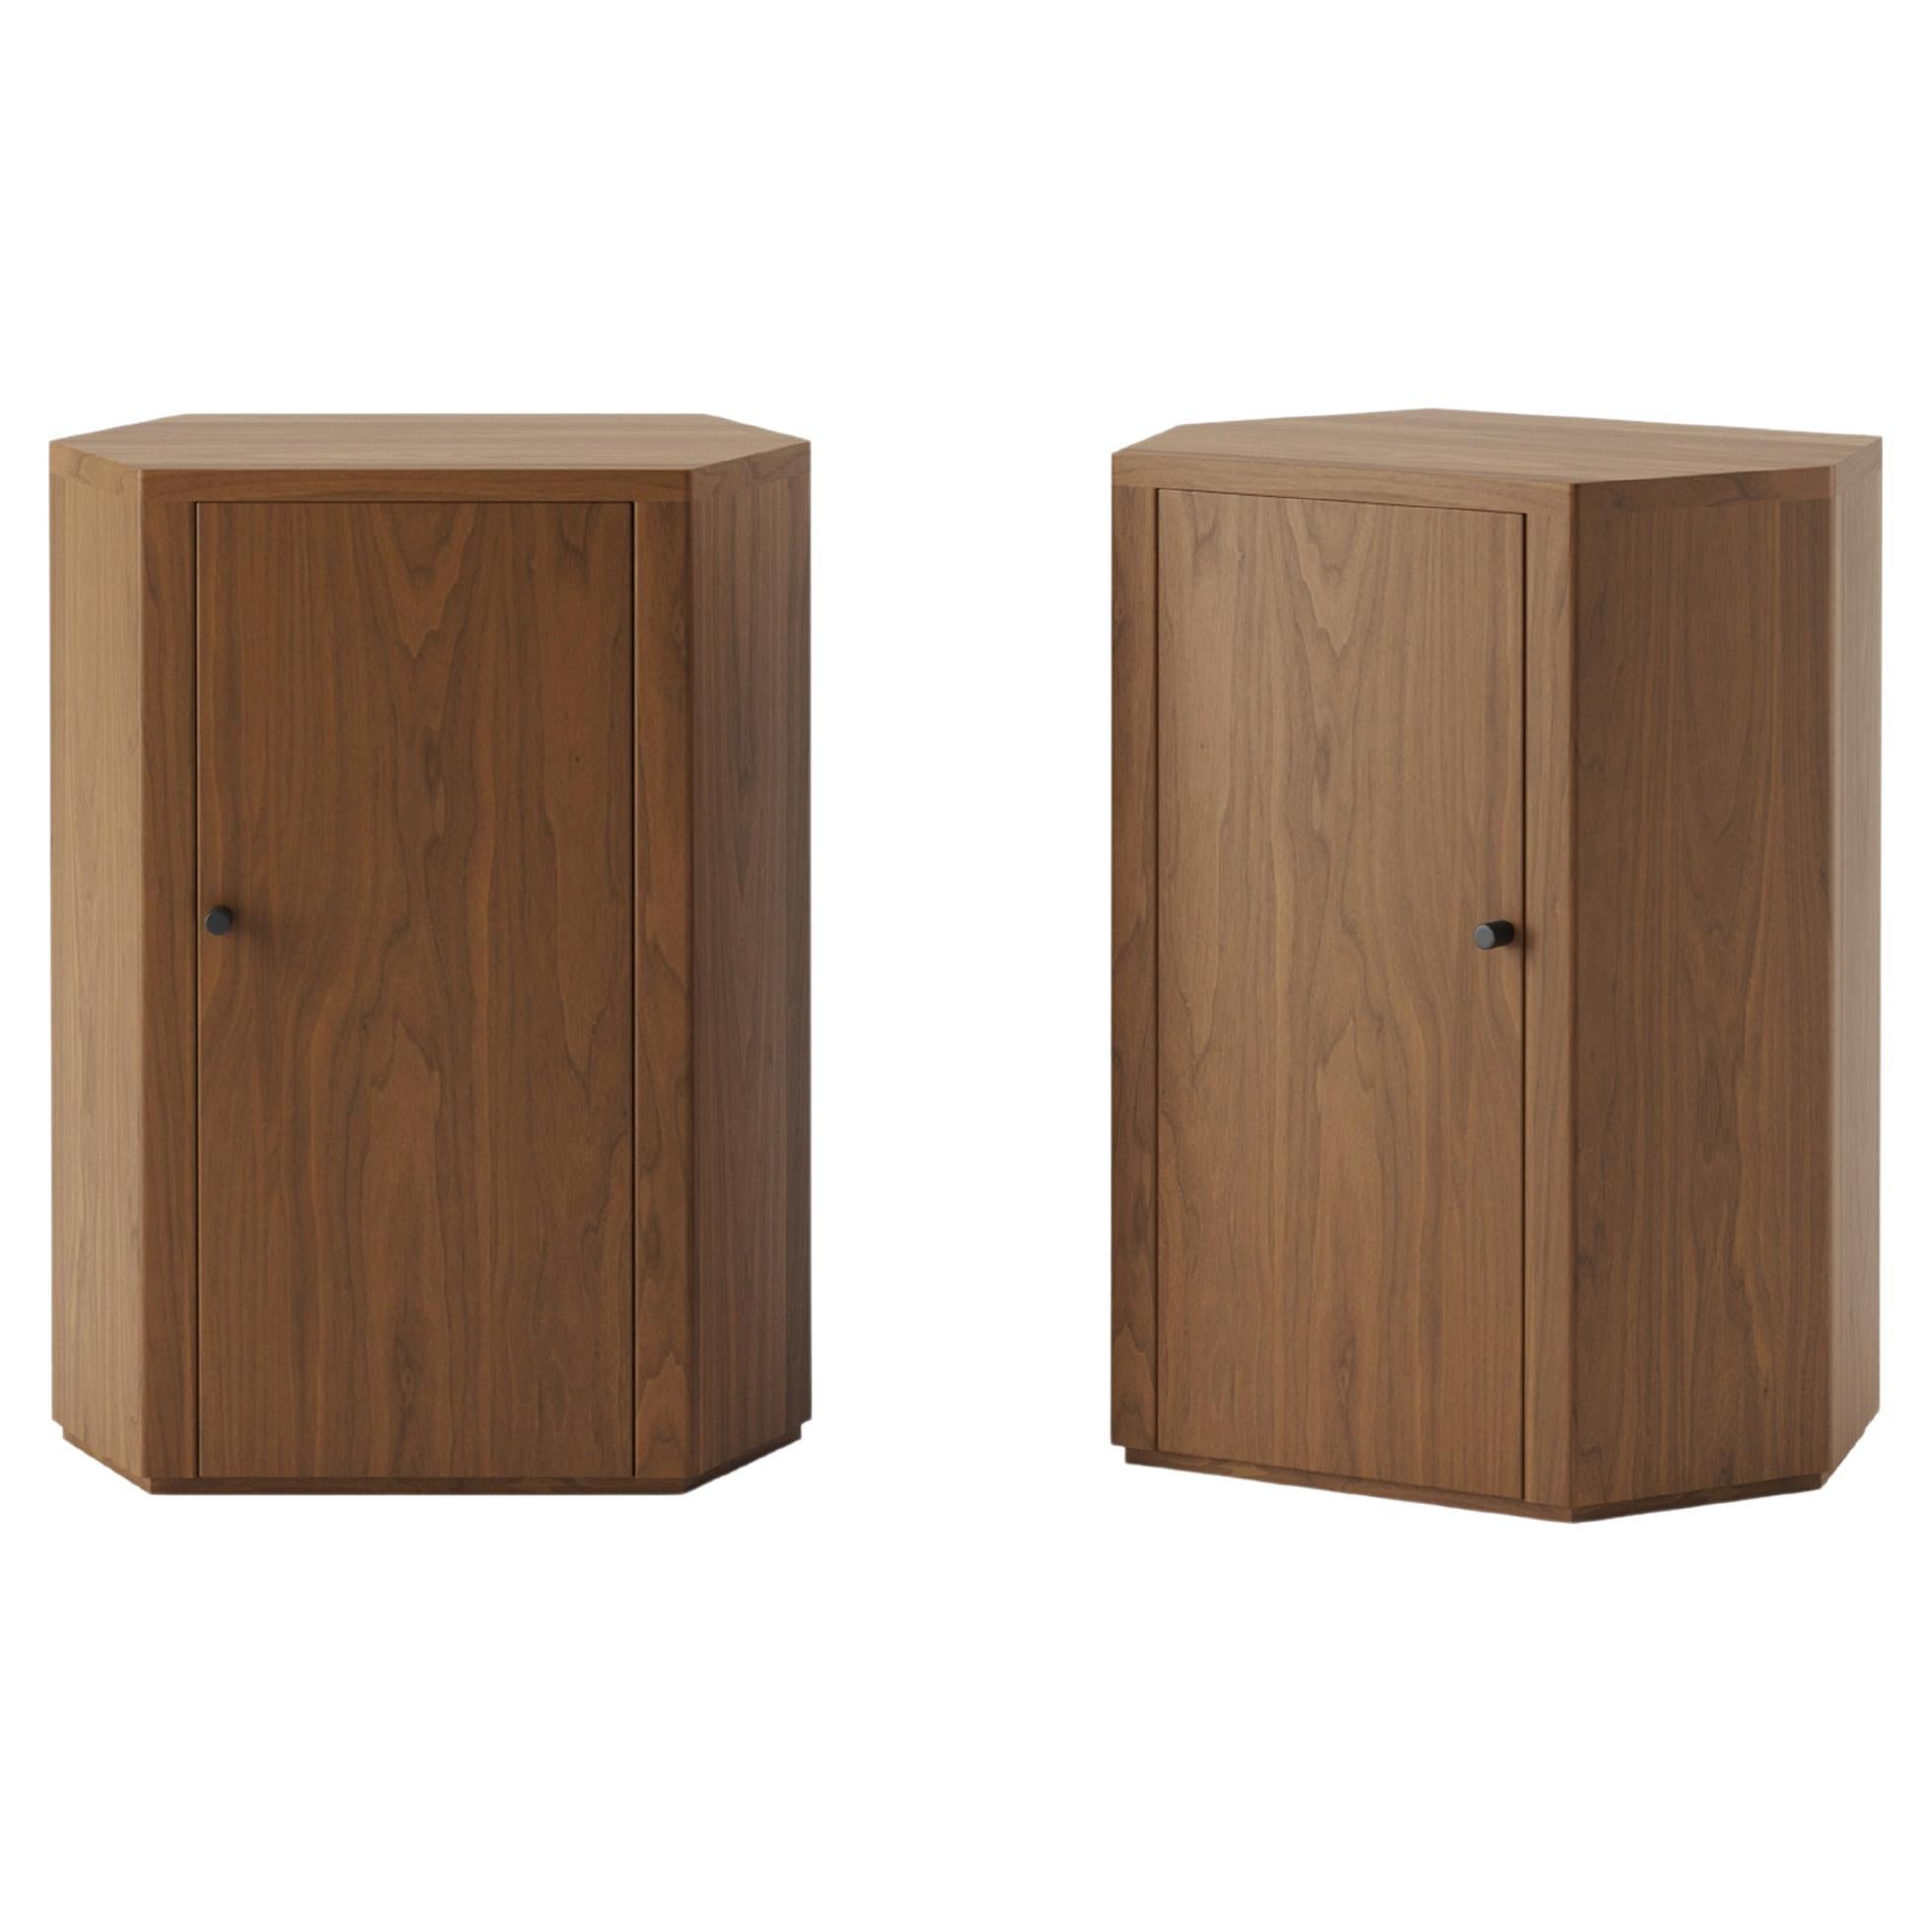 Pair of Park Night Stands in Oiled Walnut by Yaniv Chen for Lemon For Sale